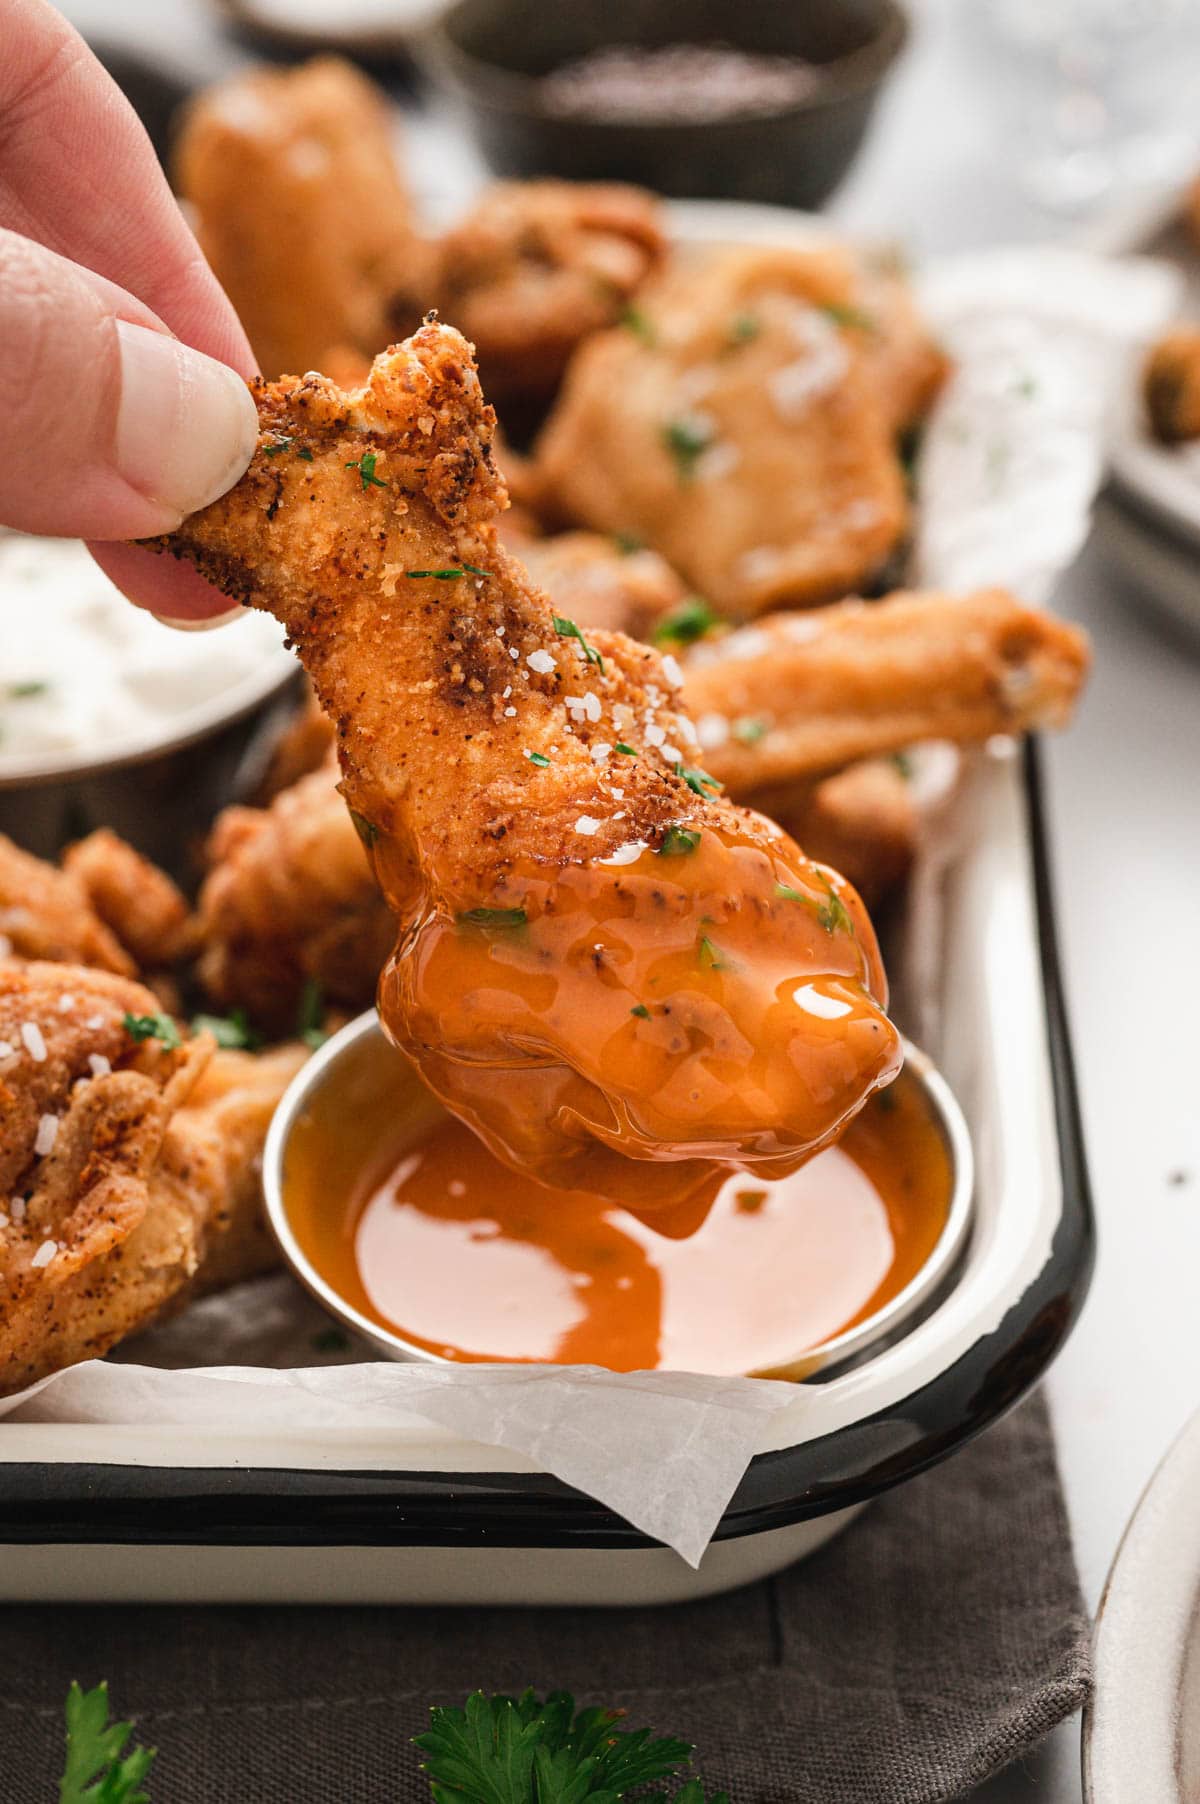 A hand dipping a chicken wings in a buffalo sauce.